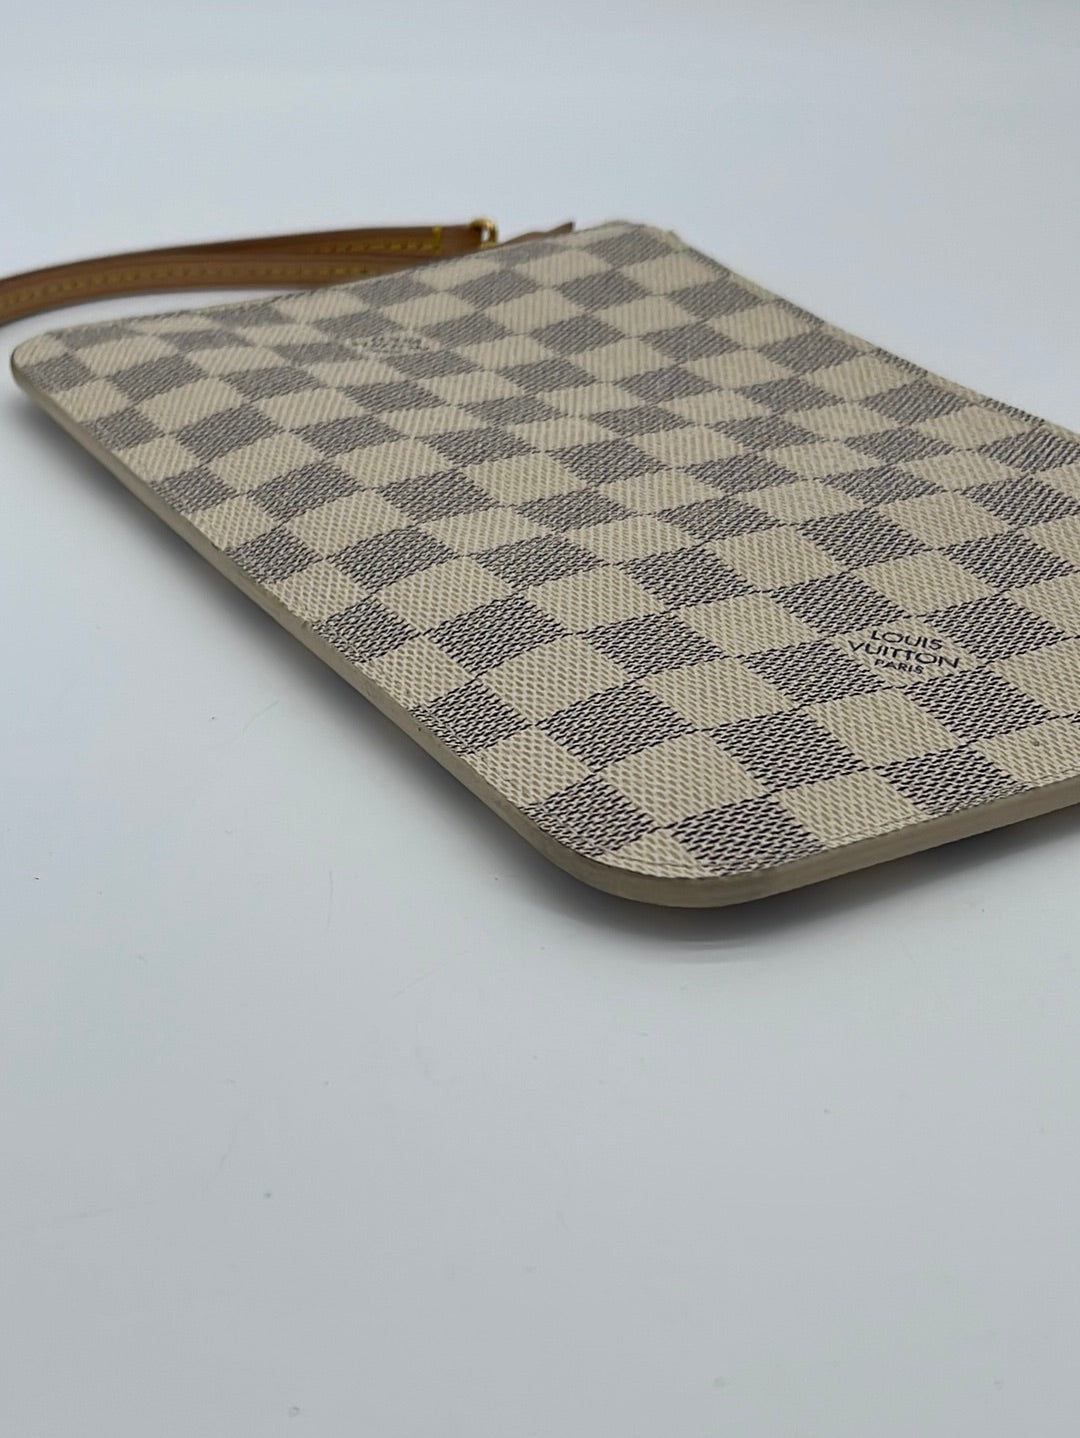 Preloved Louis Vuitton Damier Azur Neverfull Large Pouch SD2107